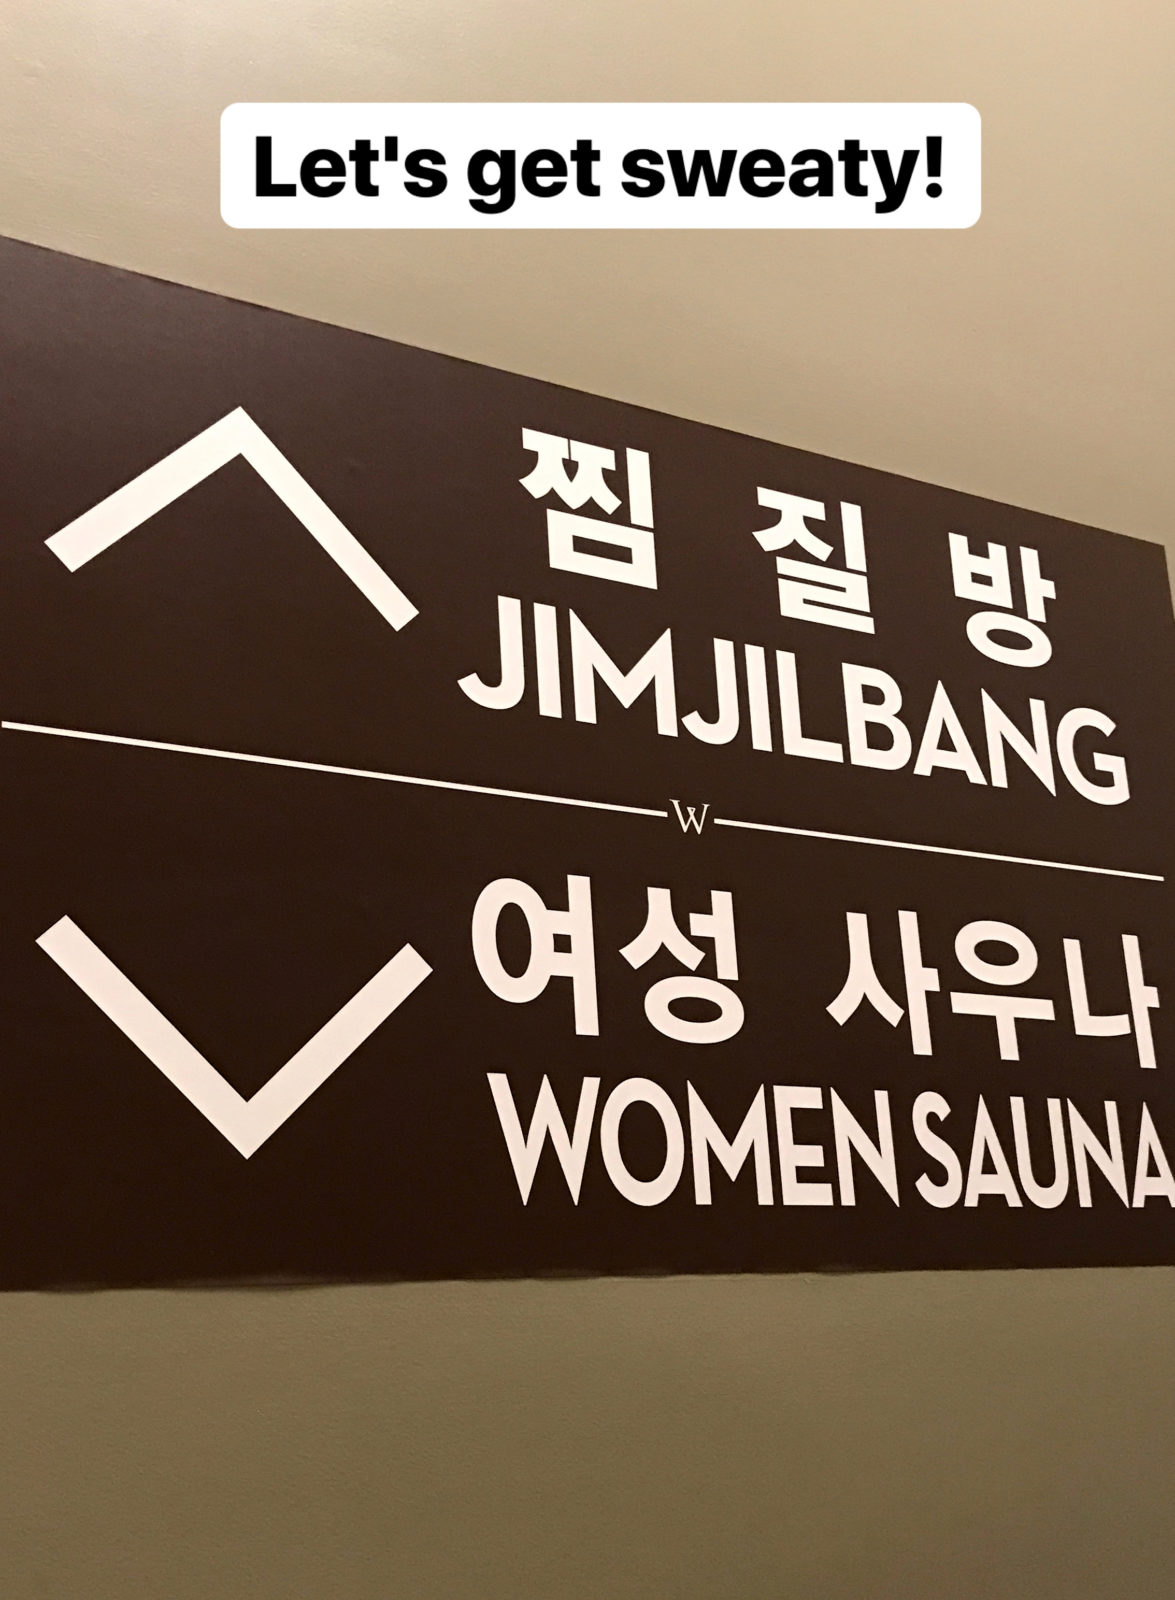 Korean Spa Jimjilbang Sauna - What to expect at a Korean spa in the US by popular Los Angeles travel blogger My Beauty Bunny